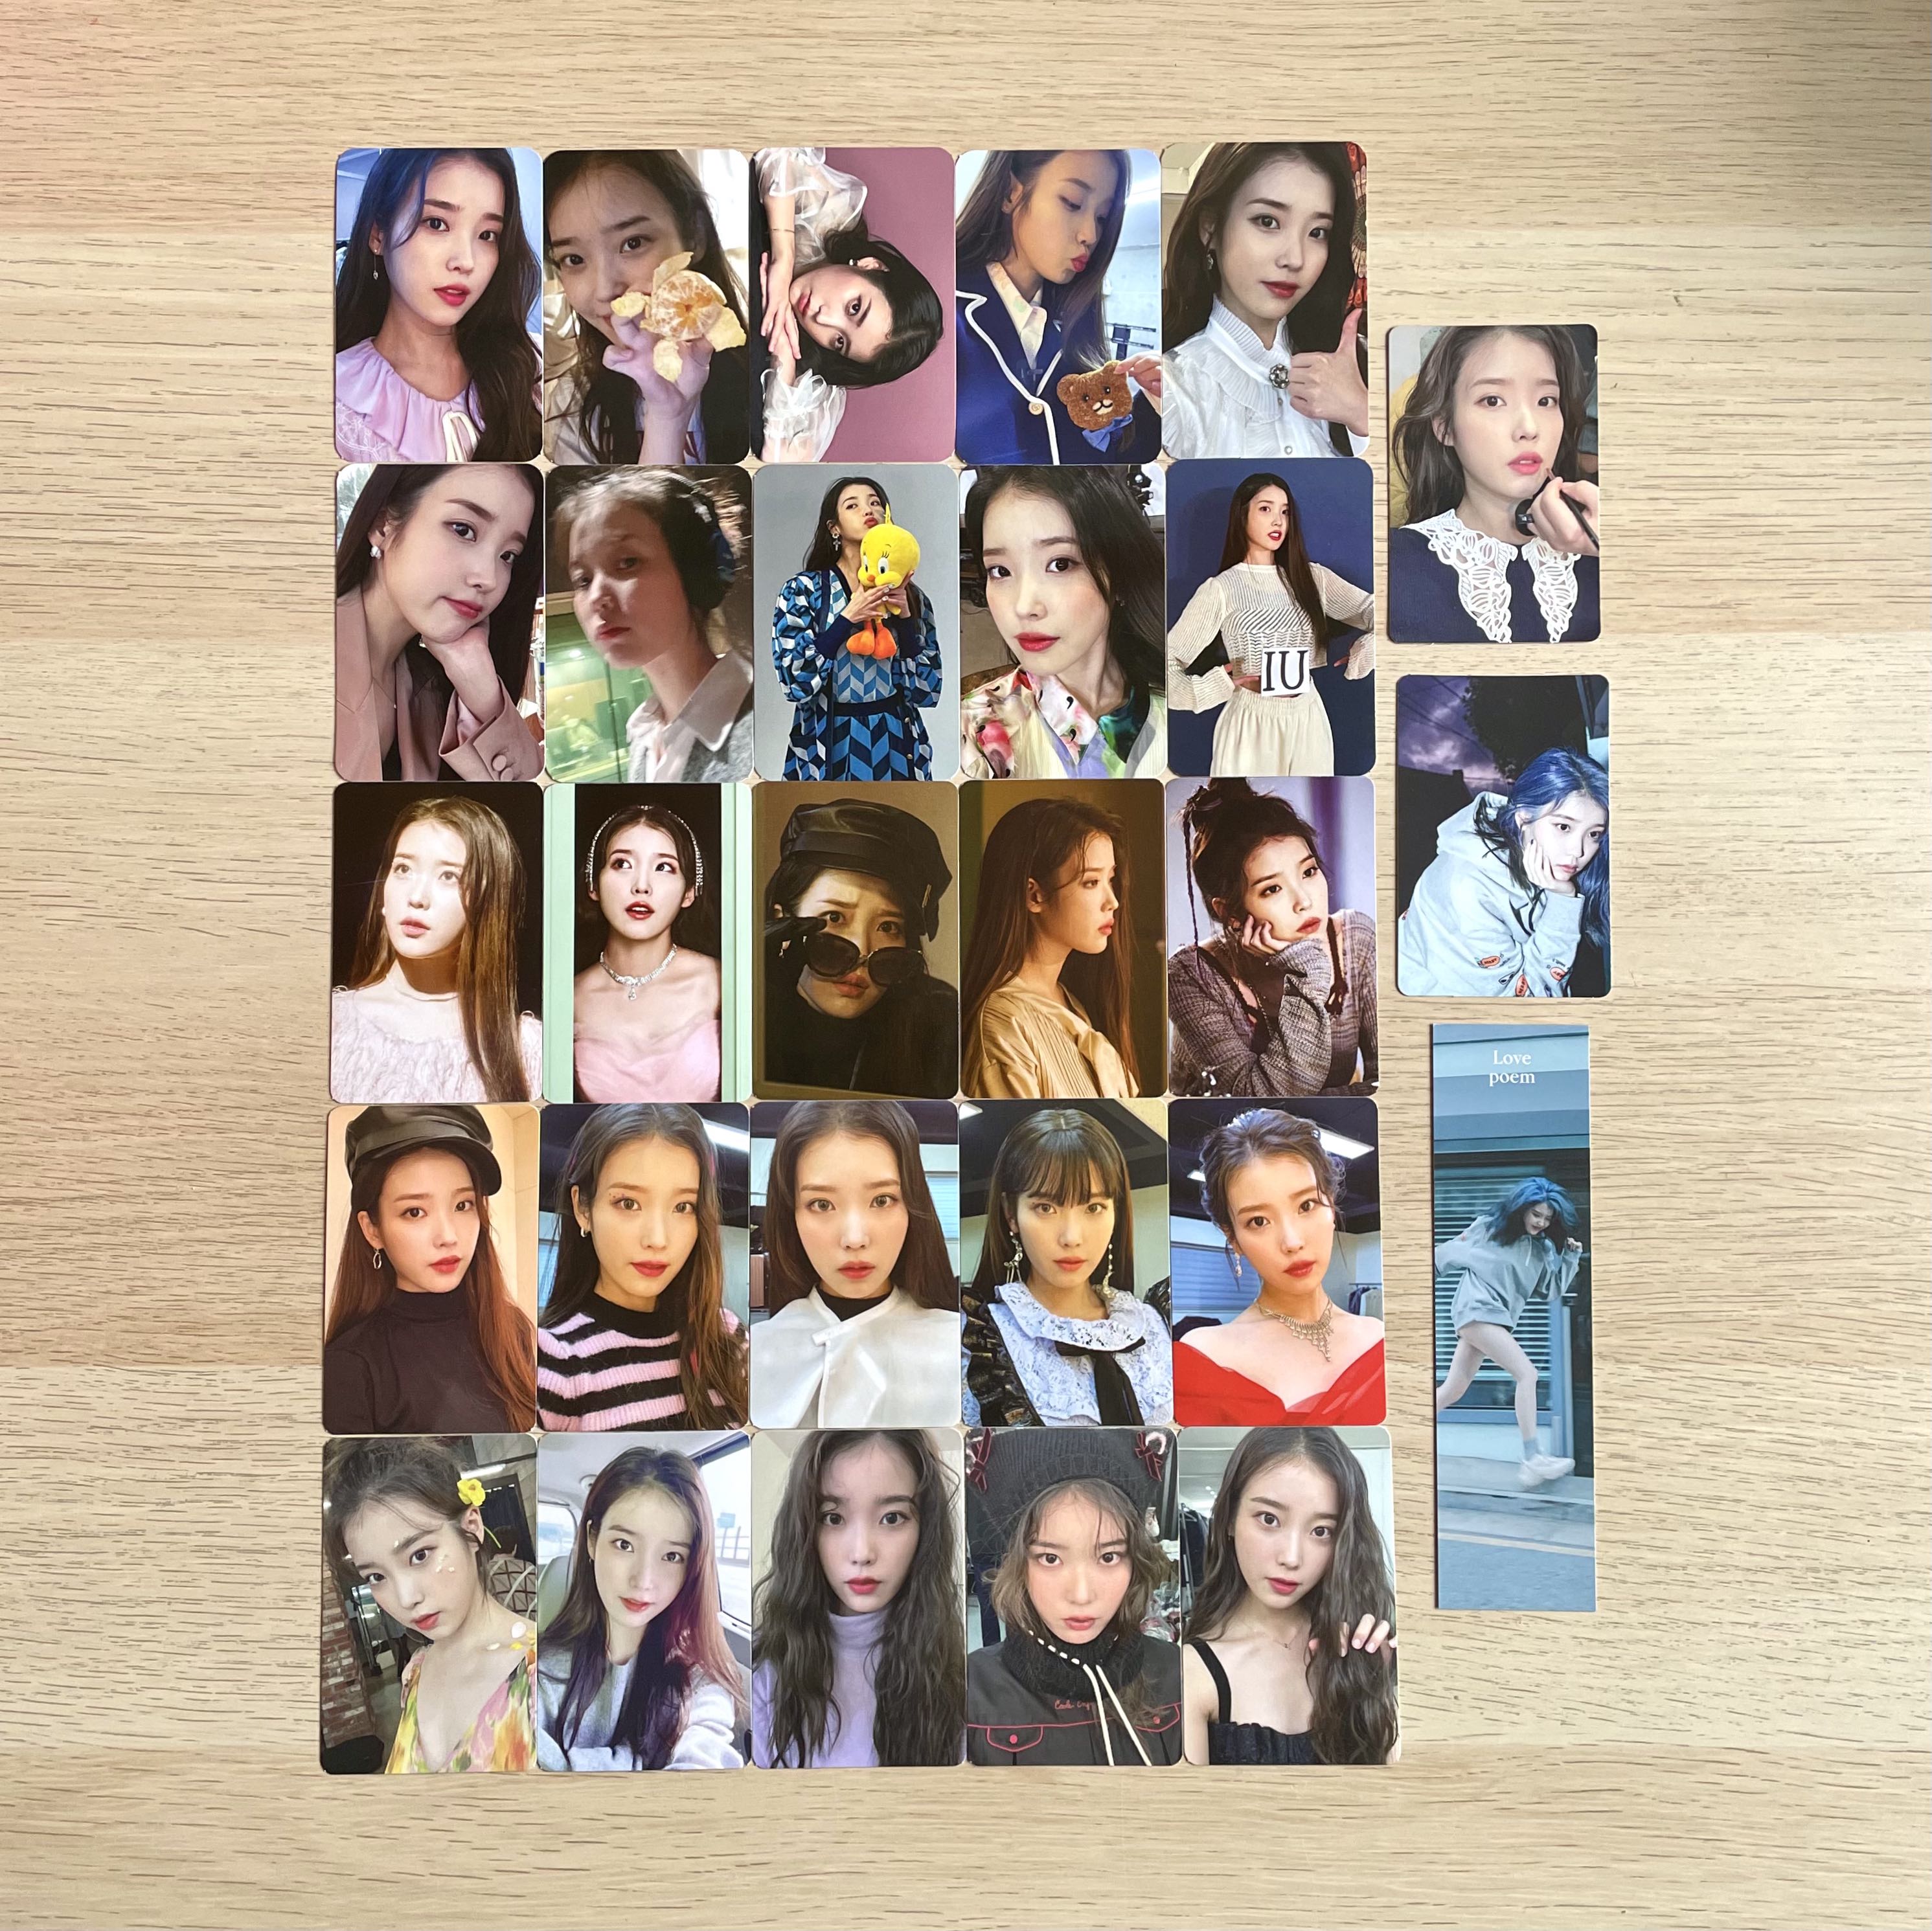 Fan Cards for Celebrities: The Ultimate Guide to Collecting, Displaying, and Showing Your Support